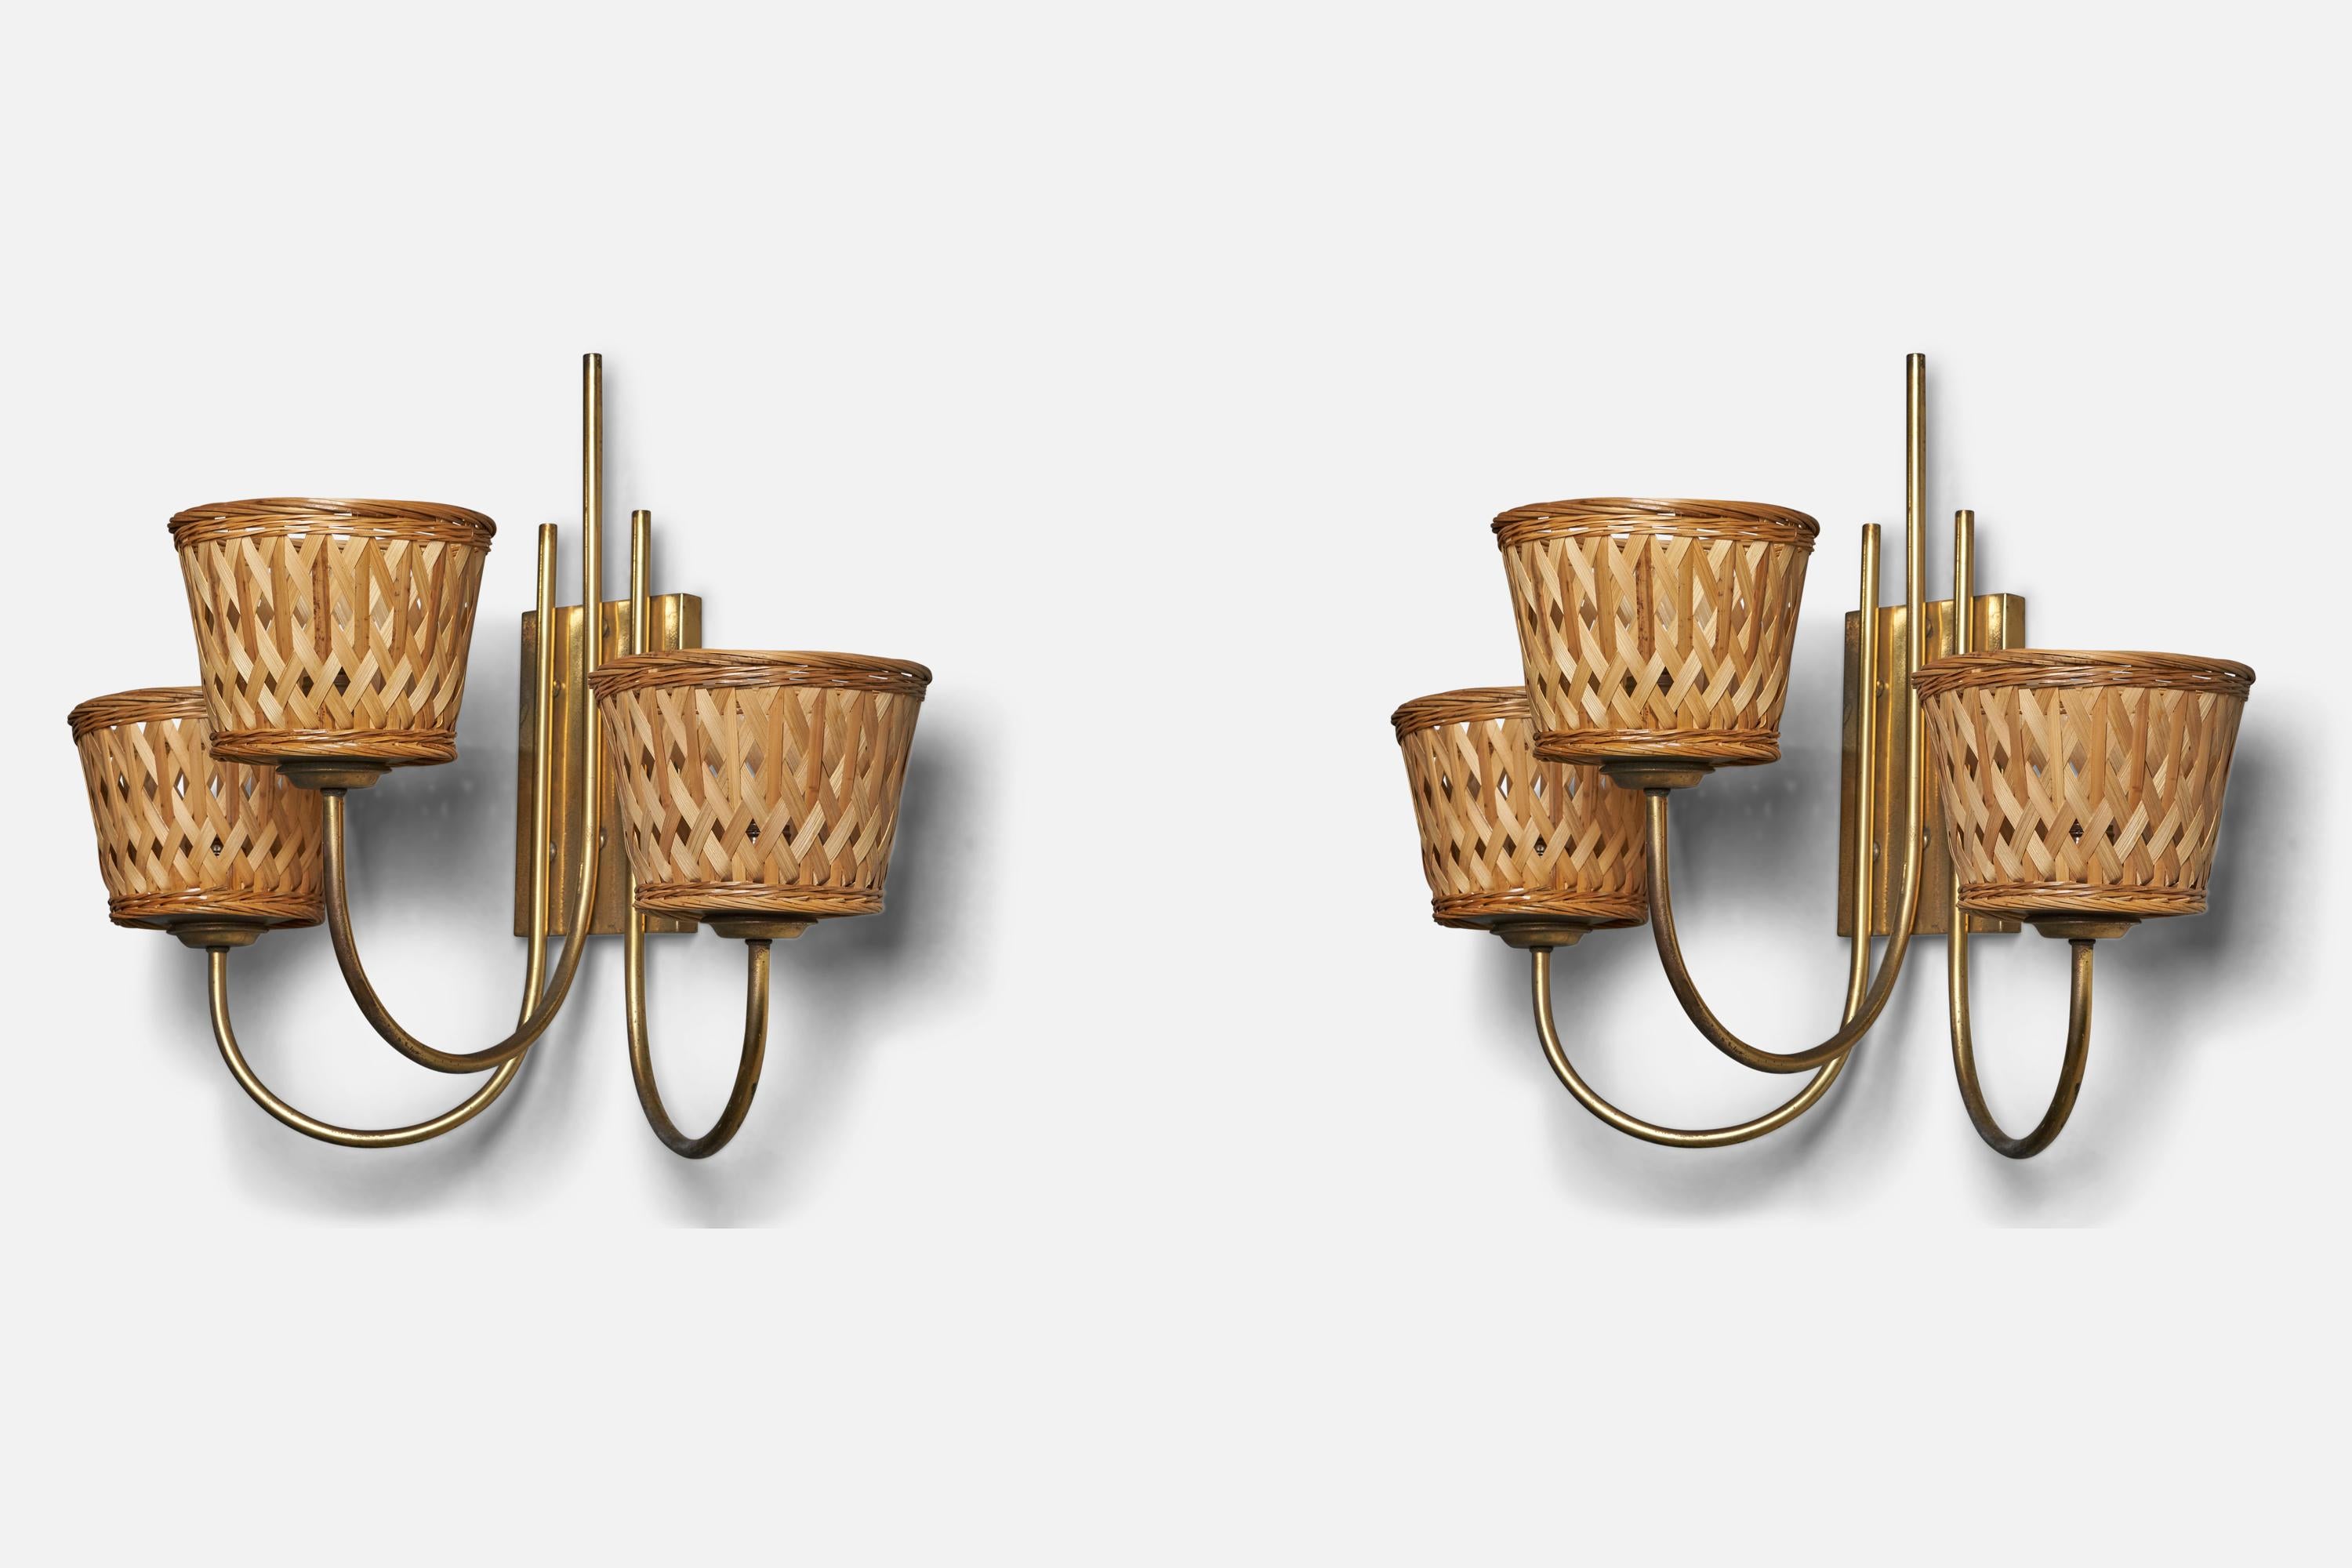 Italian Designer, Sizeable Wall Lights, Brass, Rattan, Italy, 1940s For Sale 1